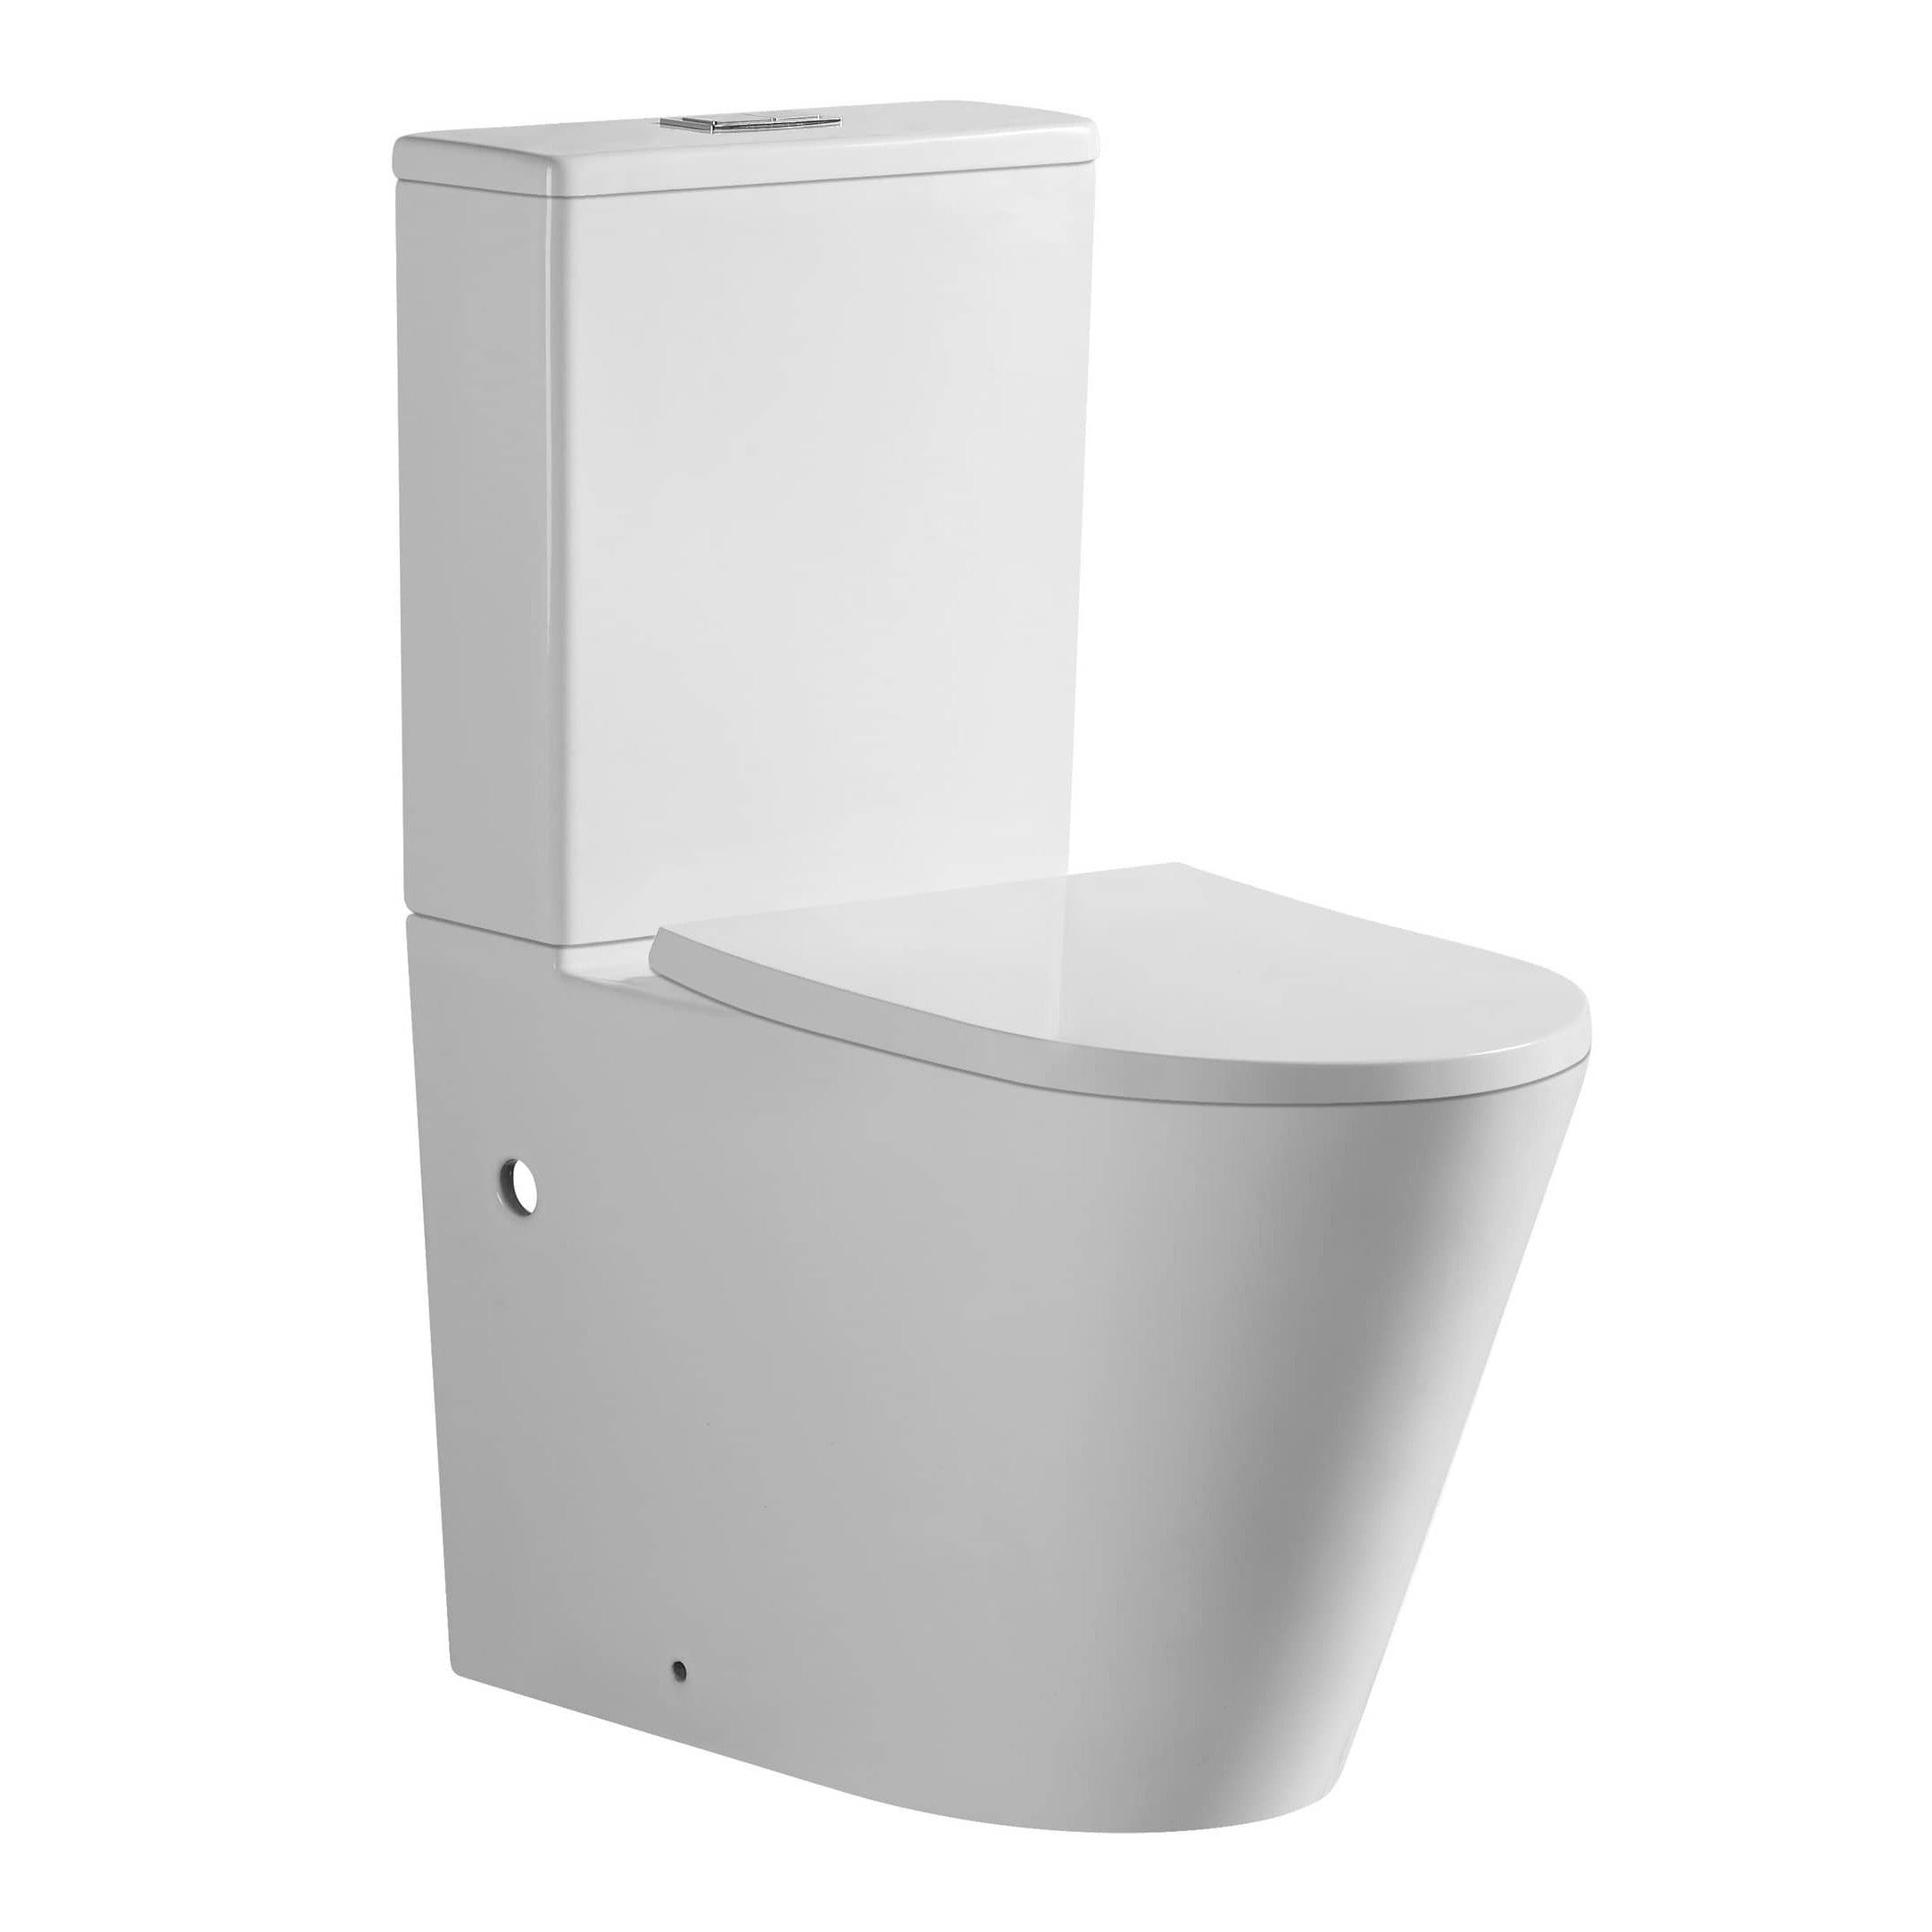 ECT Global Jamie Rimless Wall Faced Toilet Suite